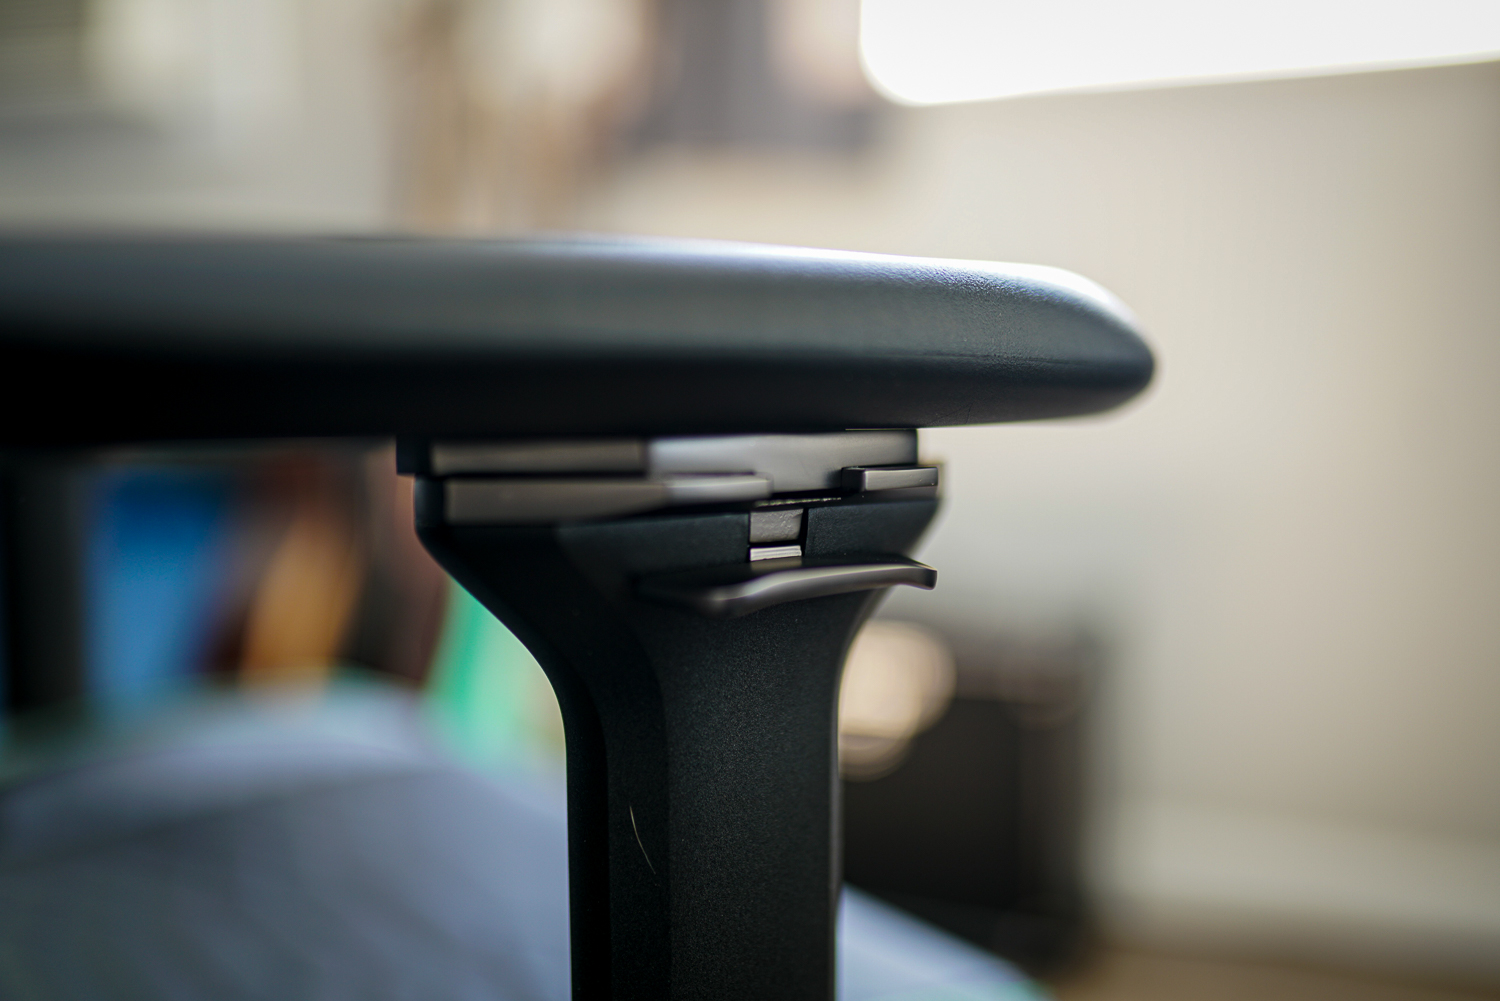 Arm rests on the Razer Iskur V2 gaming chair.